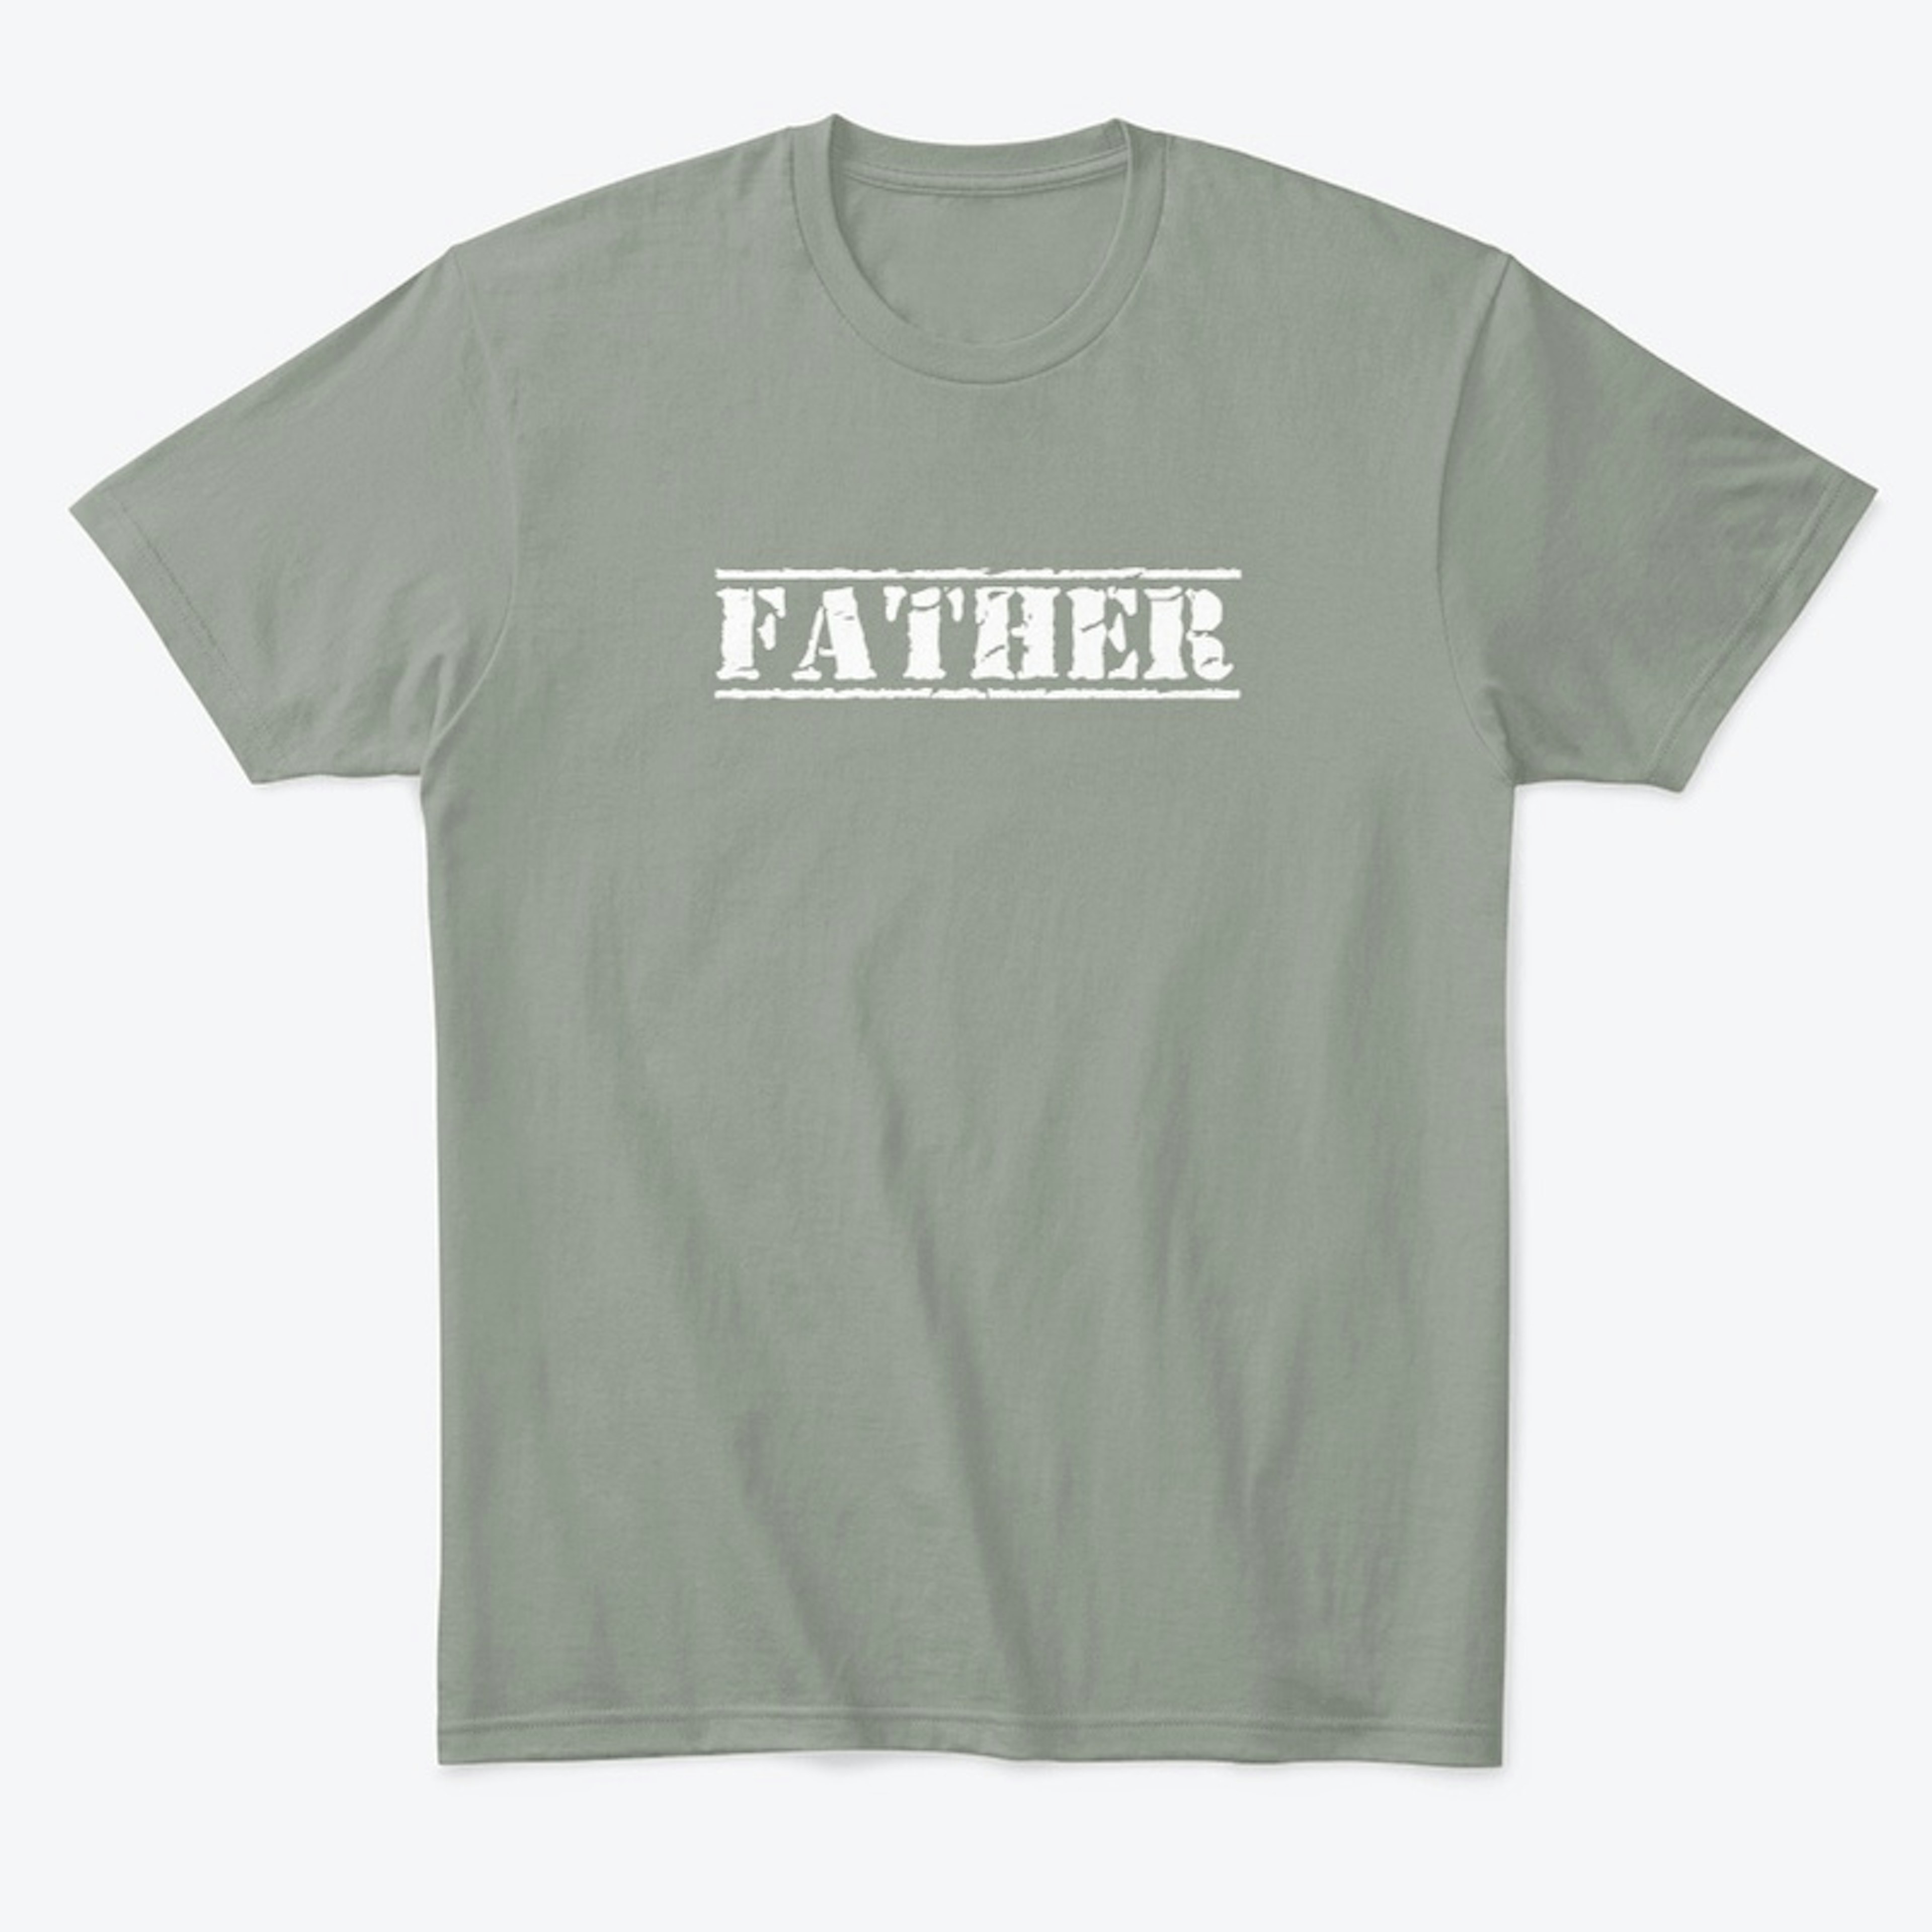 A Father is